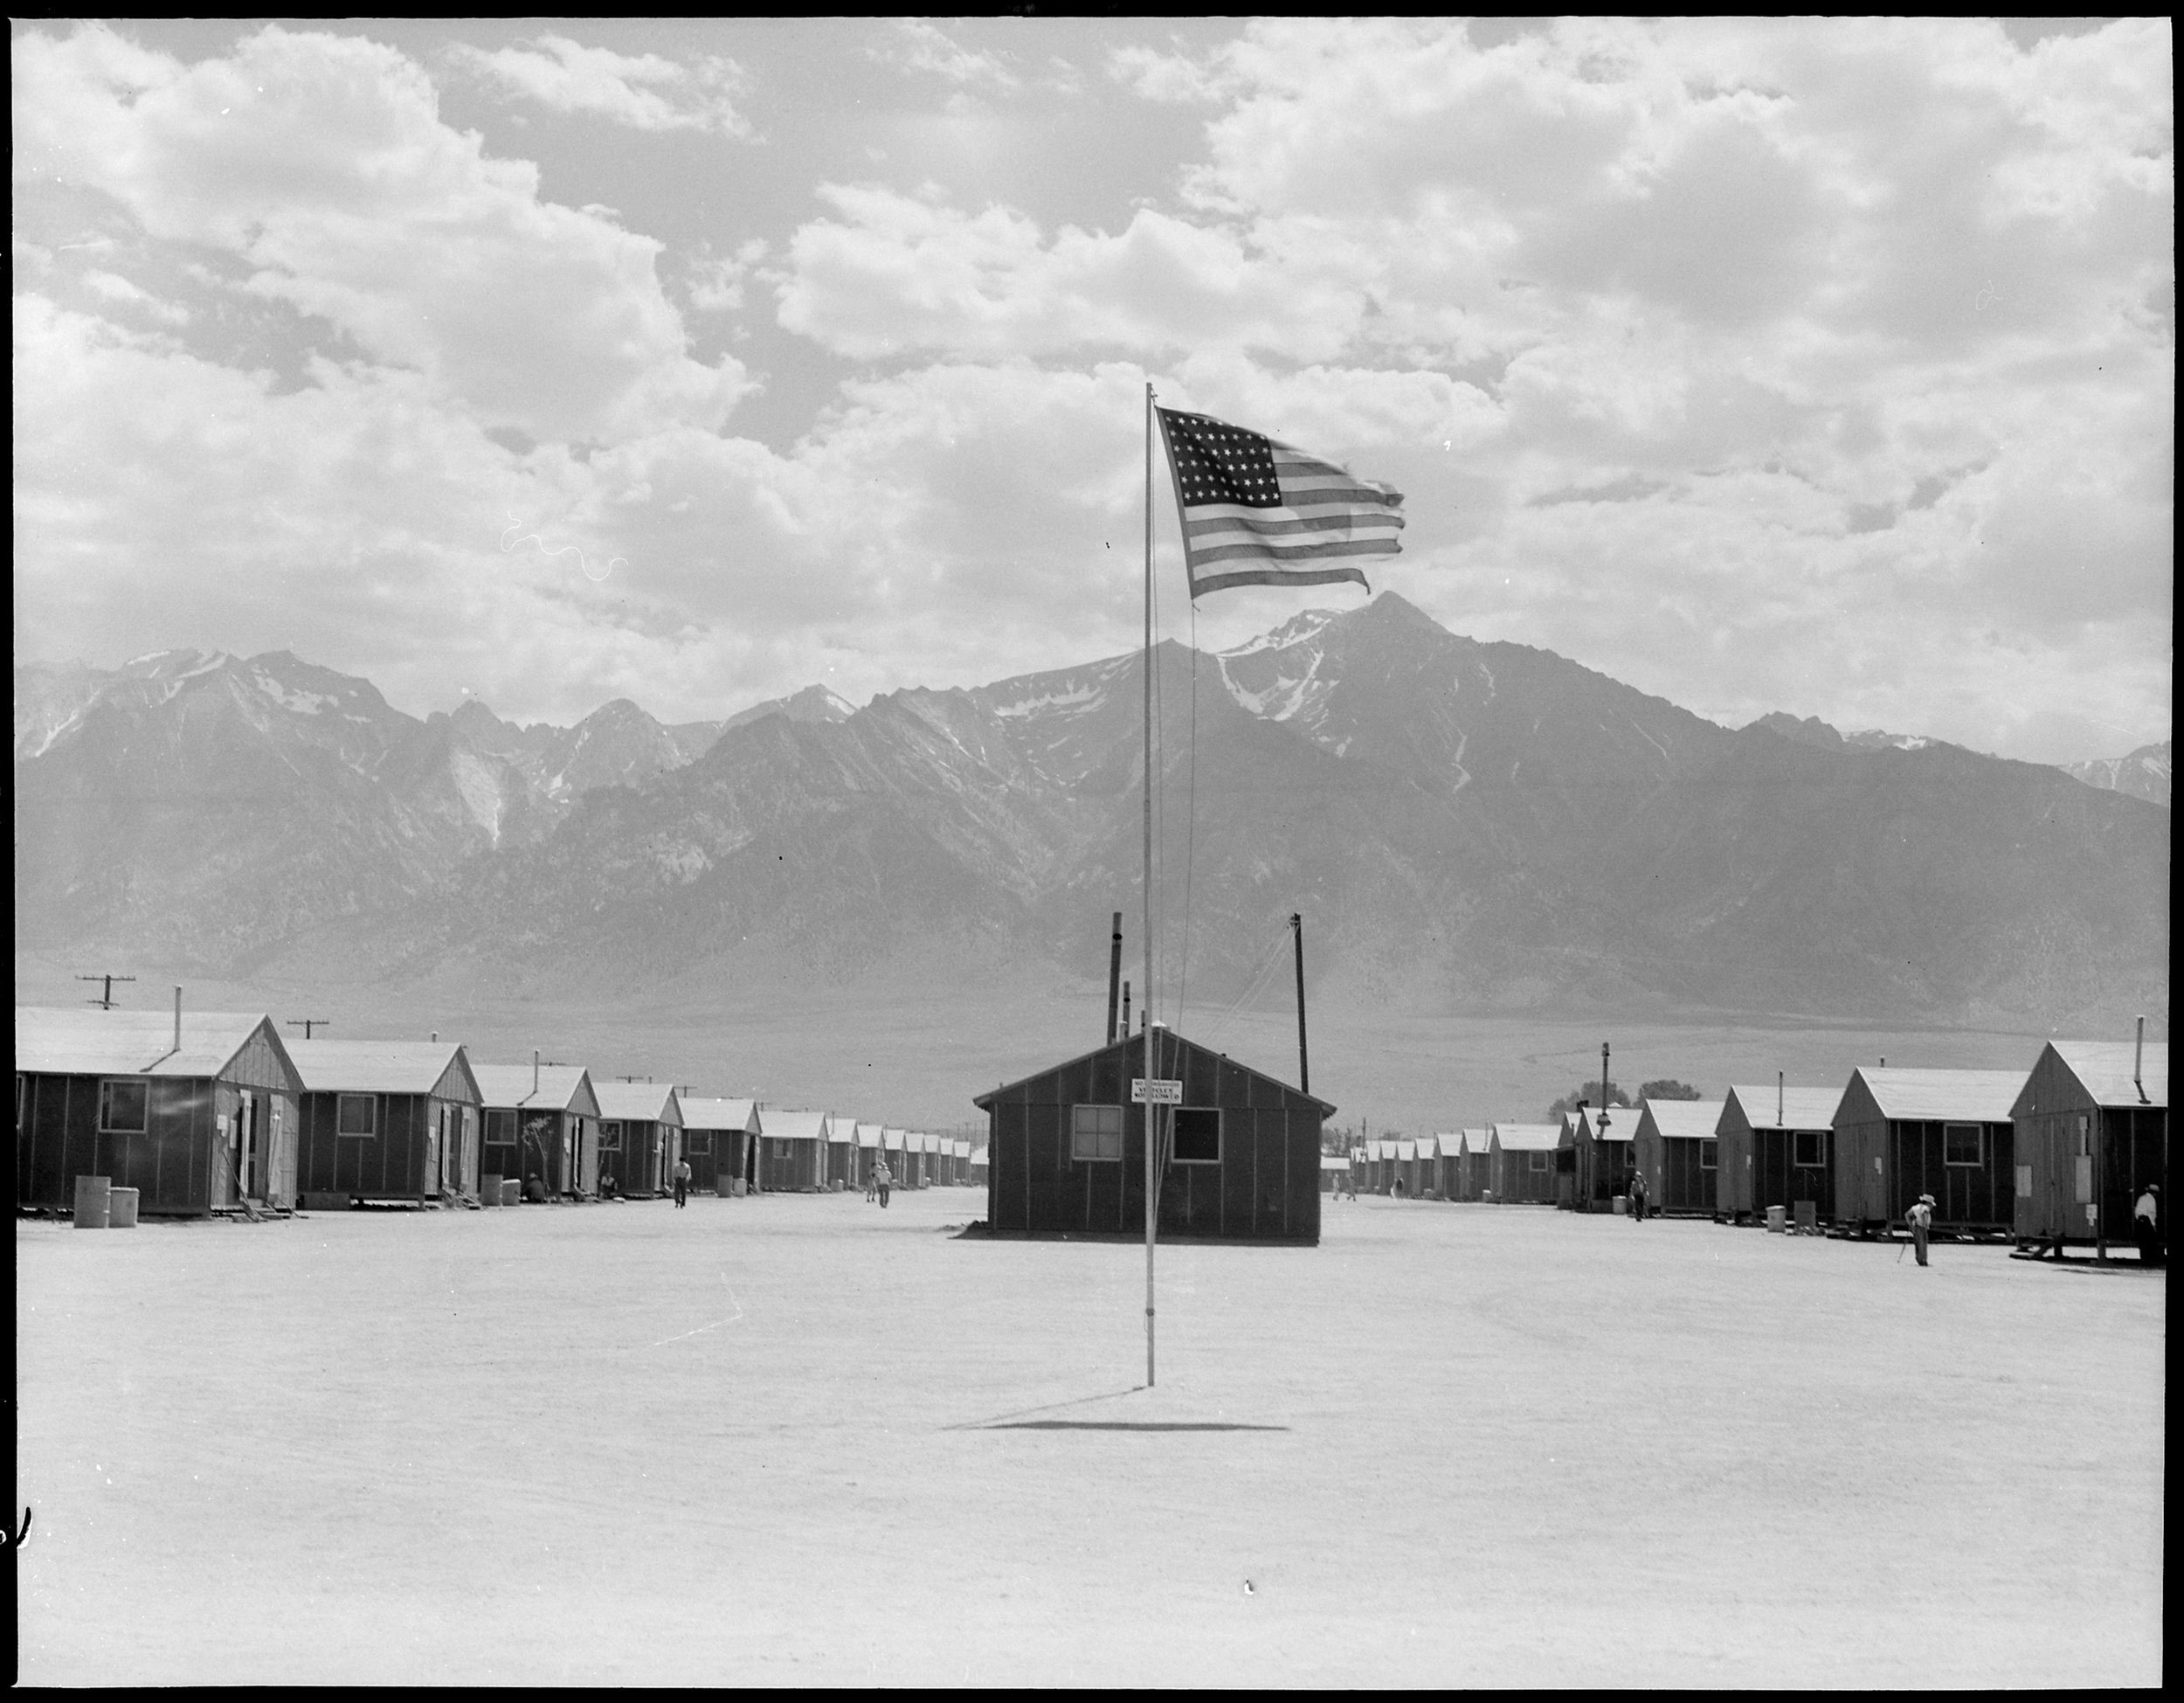 PRINT AVAILABLE July 3, 1942 — Manzanar Relocation Center, Manzanar, California. Street scene of barrack homes at this War Relocation Authority Center. The windstorm has subsided and the dust has settled.